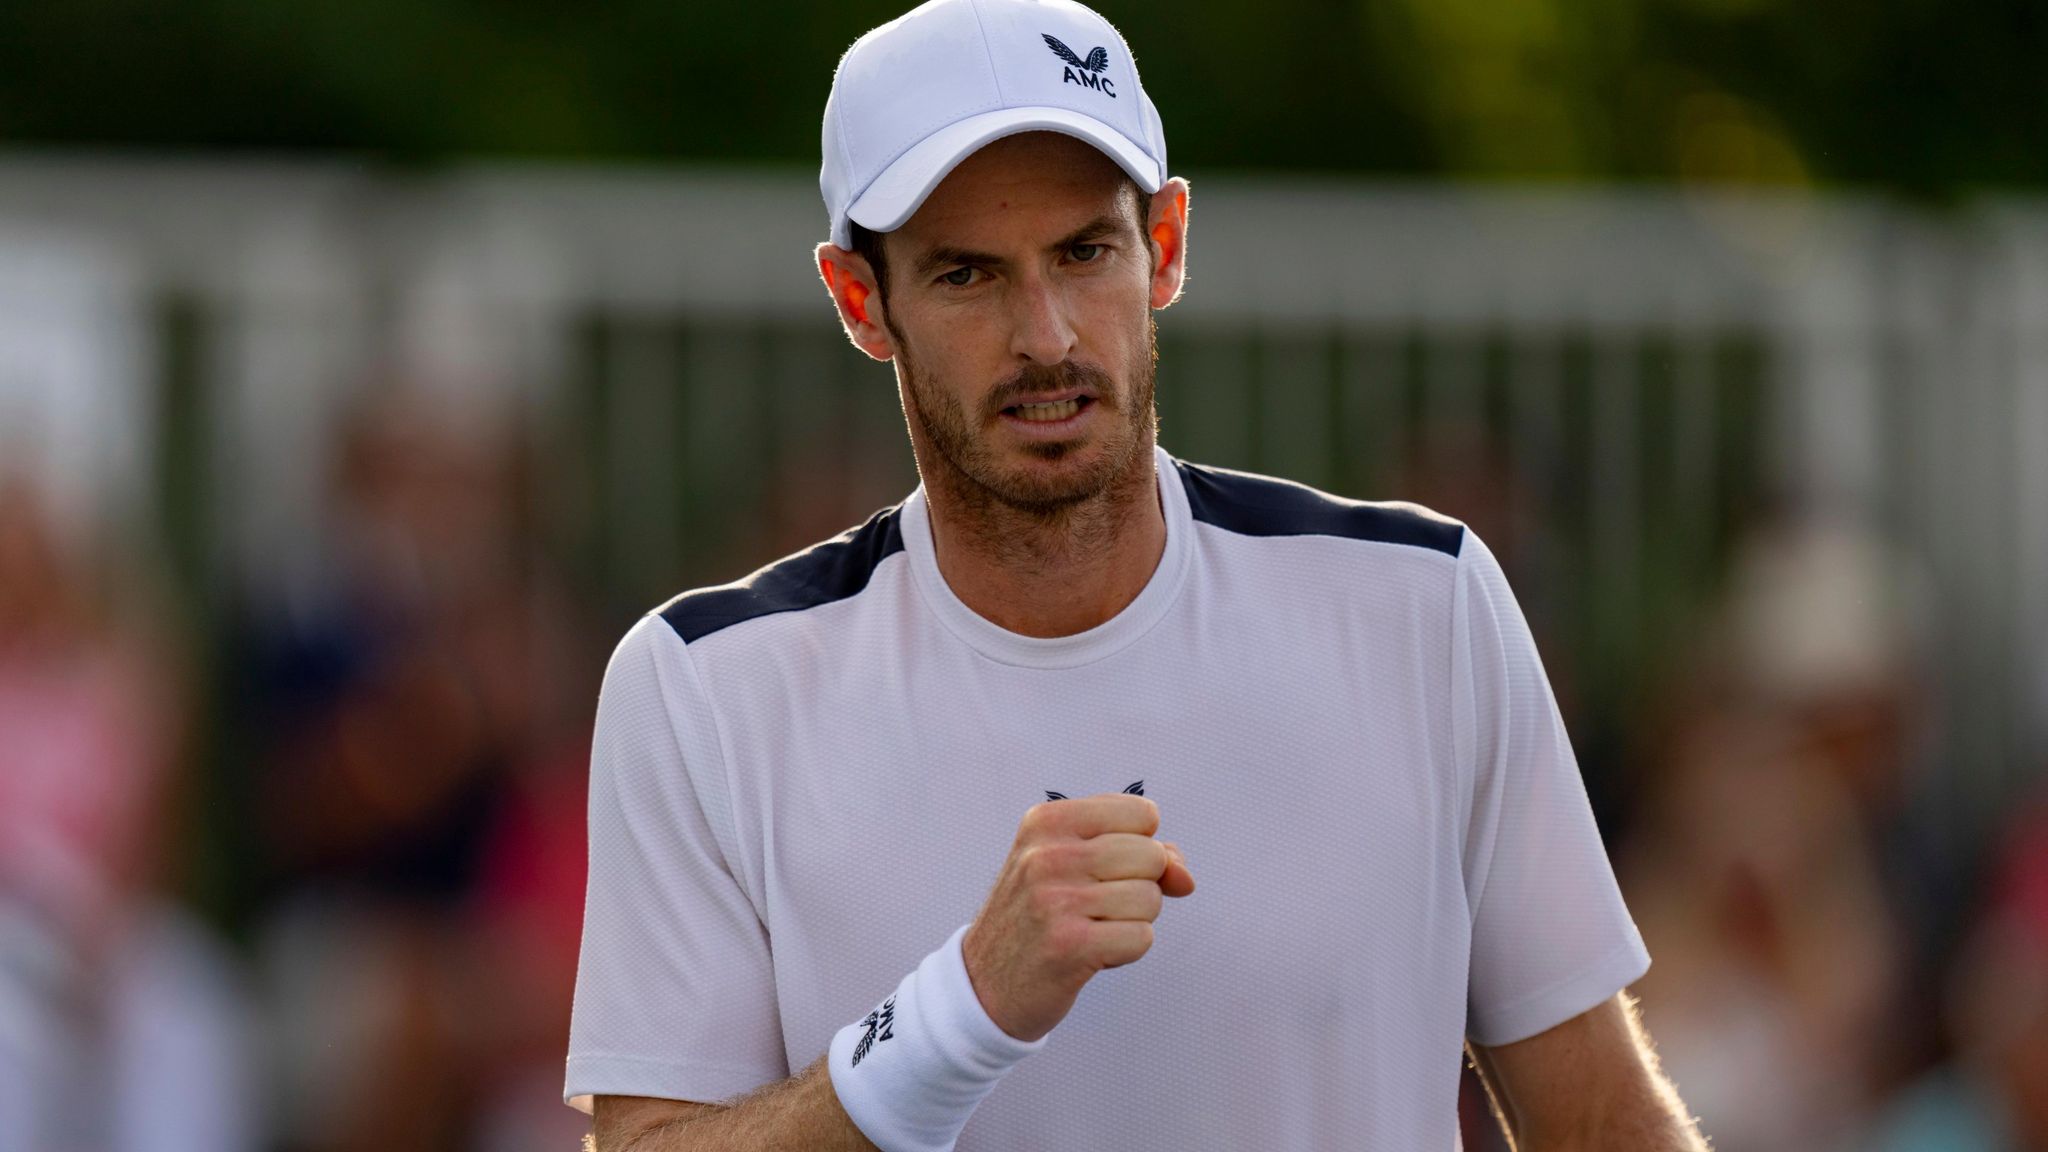 andy murray match today live